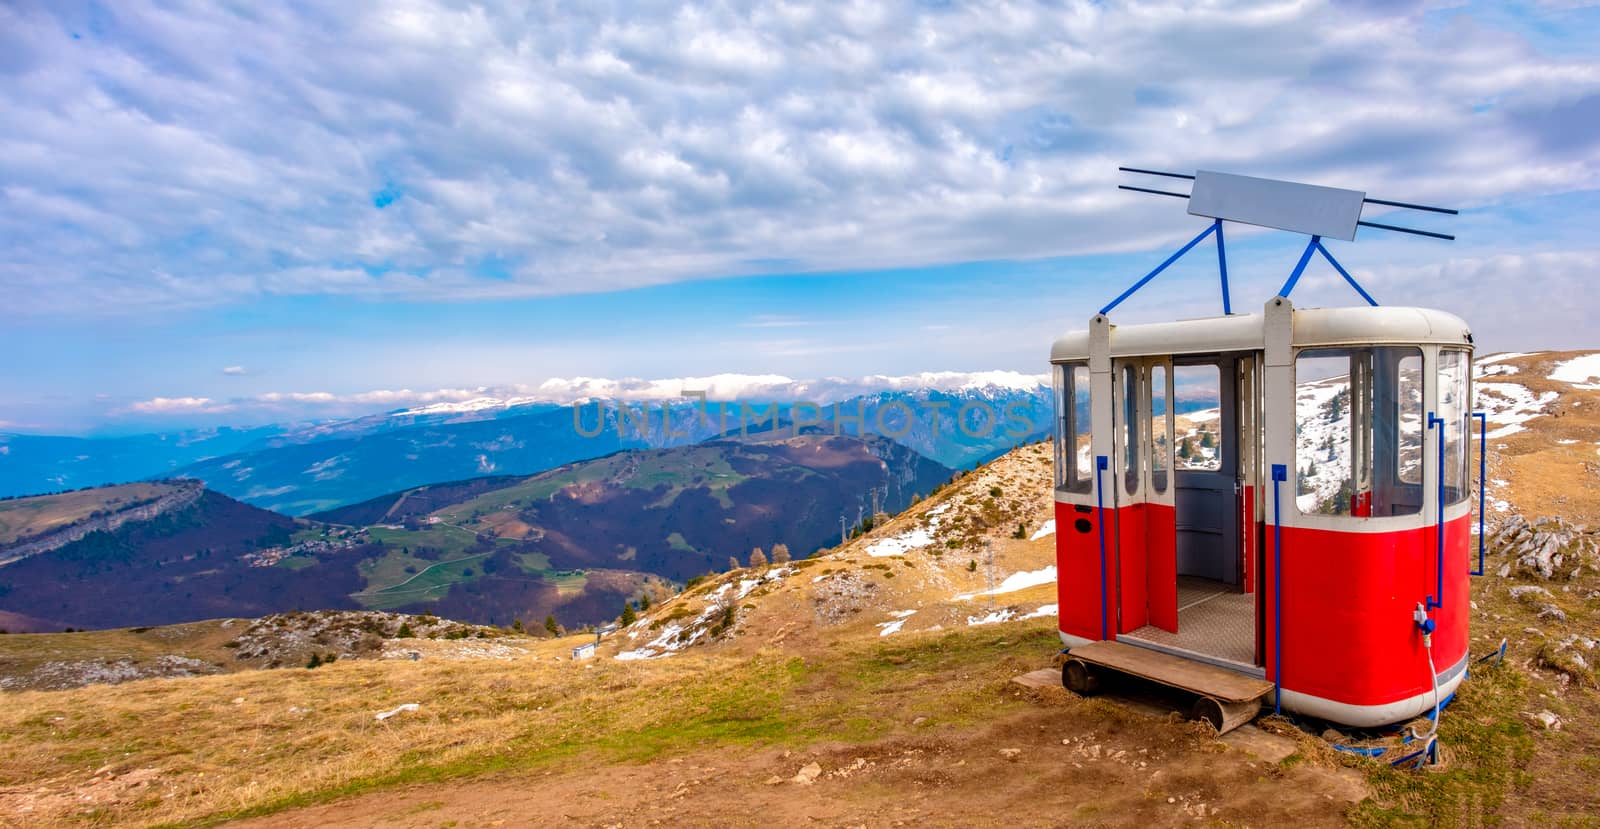 old cable way lift gondola cab abandoned in peak panorama of Monte Baldo mountain near Malcesine in Italy by LucaLorenzelli